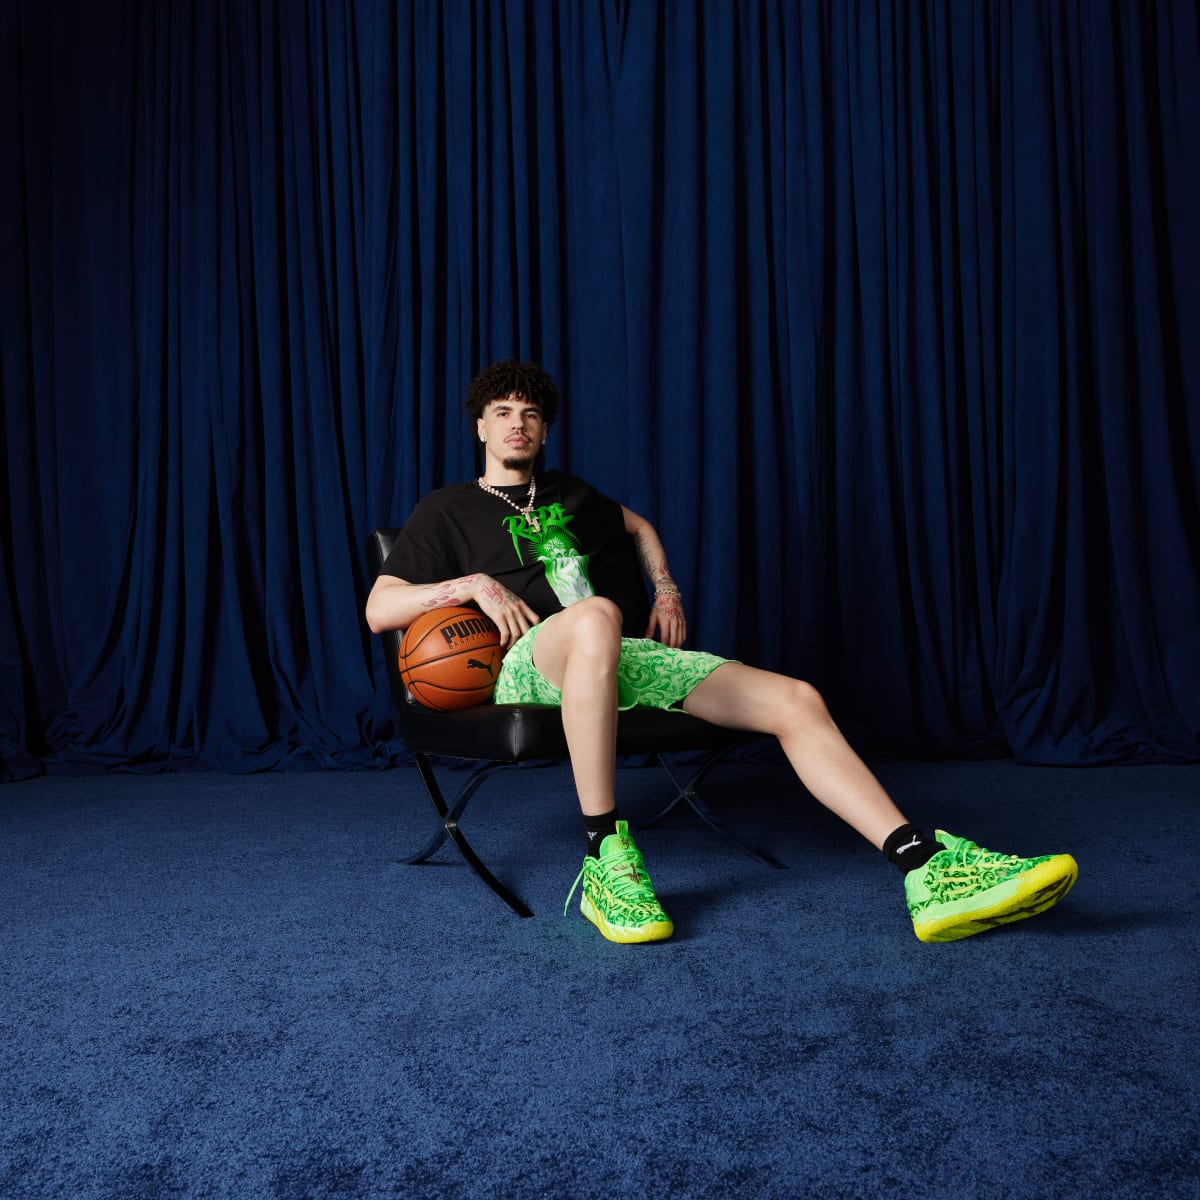 PUMA releasing new style of LaMelo Ball's MB.01 signature shoe